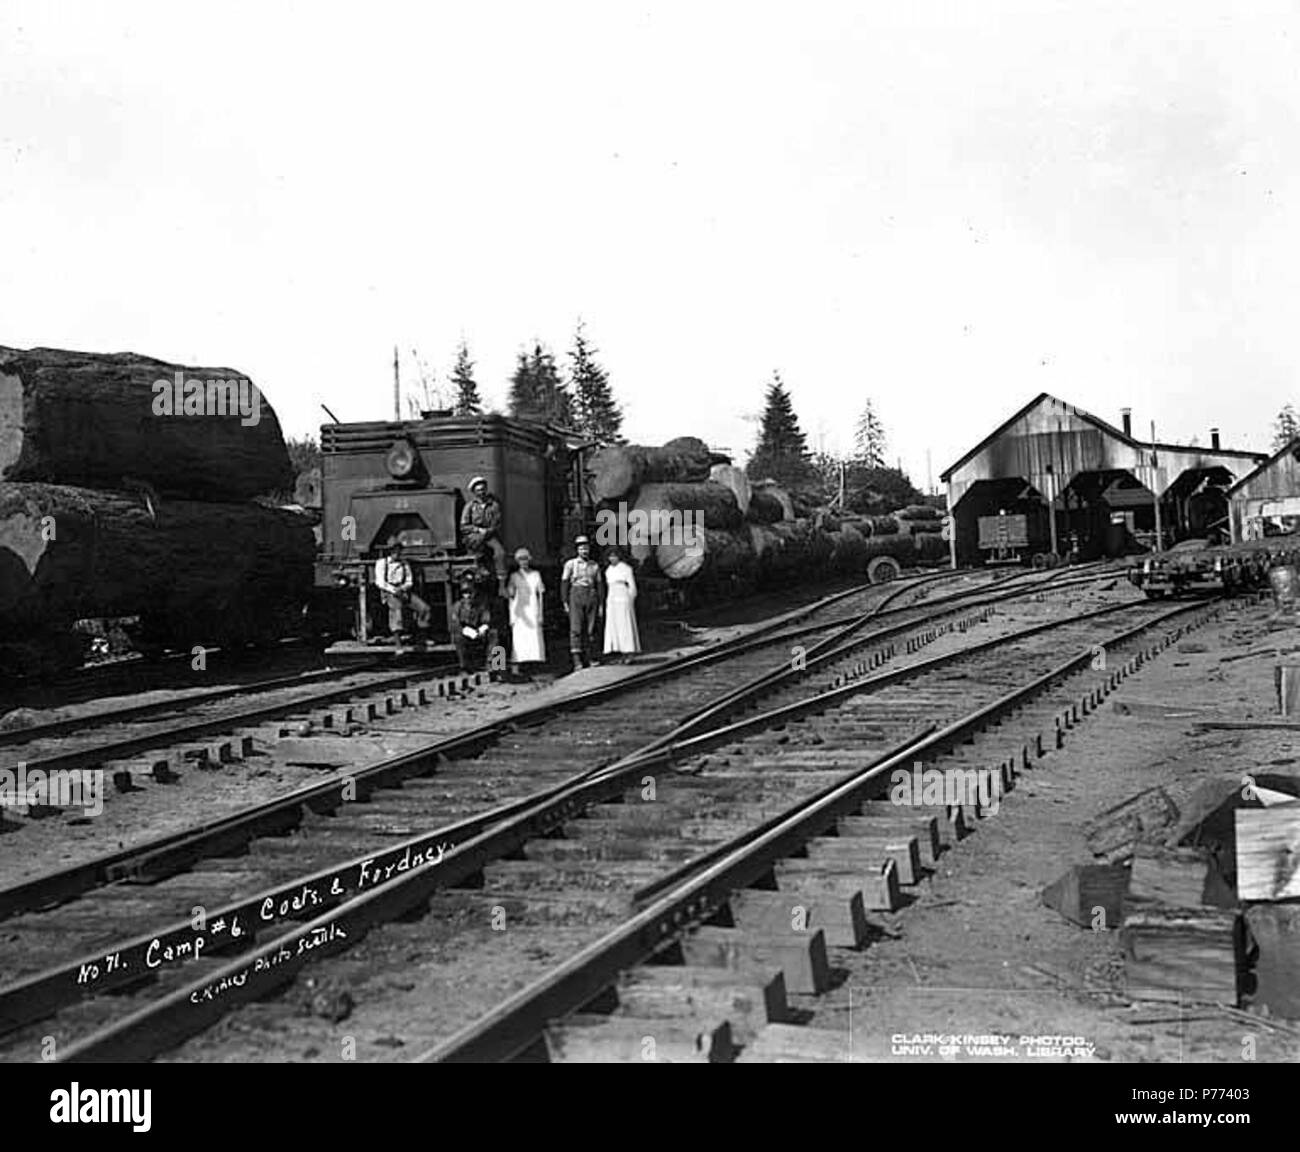 . English: Loggers and mess hall crew with locomotive and log train,Camp 6, Coats-Fordney Lumber Company, near Aberdeen, ca. 1920 . English: Caption on image: Camp #6, Coats & Fordney. C. Kinsey Photo, Seattle. No. 71 PH Coll 516.631 The Coats-Fordney Lumber Company started out as the A.F. Coats Lumber Company in 1905, headquartered in Aberdeen. It became the Coats-Fordney Lumber Company in 1910, and by 1924, it was called the Donovan-Corkery Lumber Company. Aberdeen is a city in Grays Harbor (formerly called Chehalis) County. The town was platted by Samuel Benn in 1884 on his homestead. Benn  Stock Photo